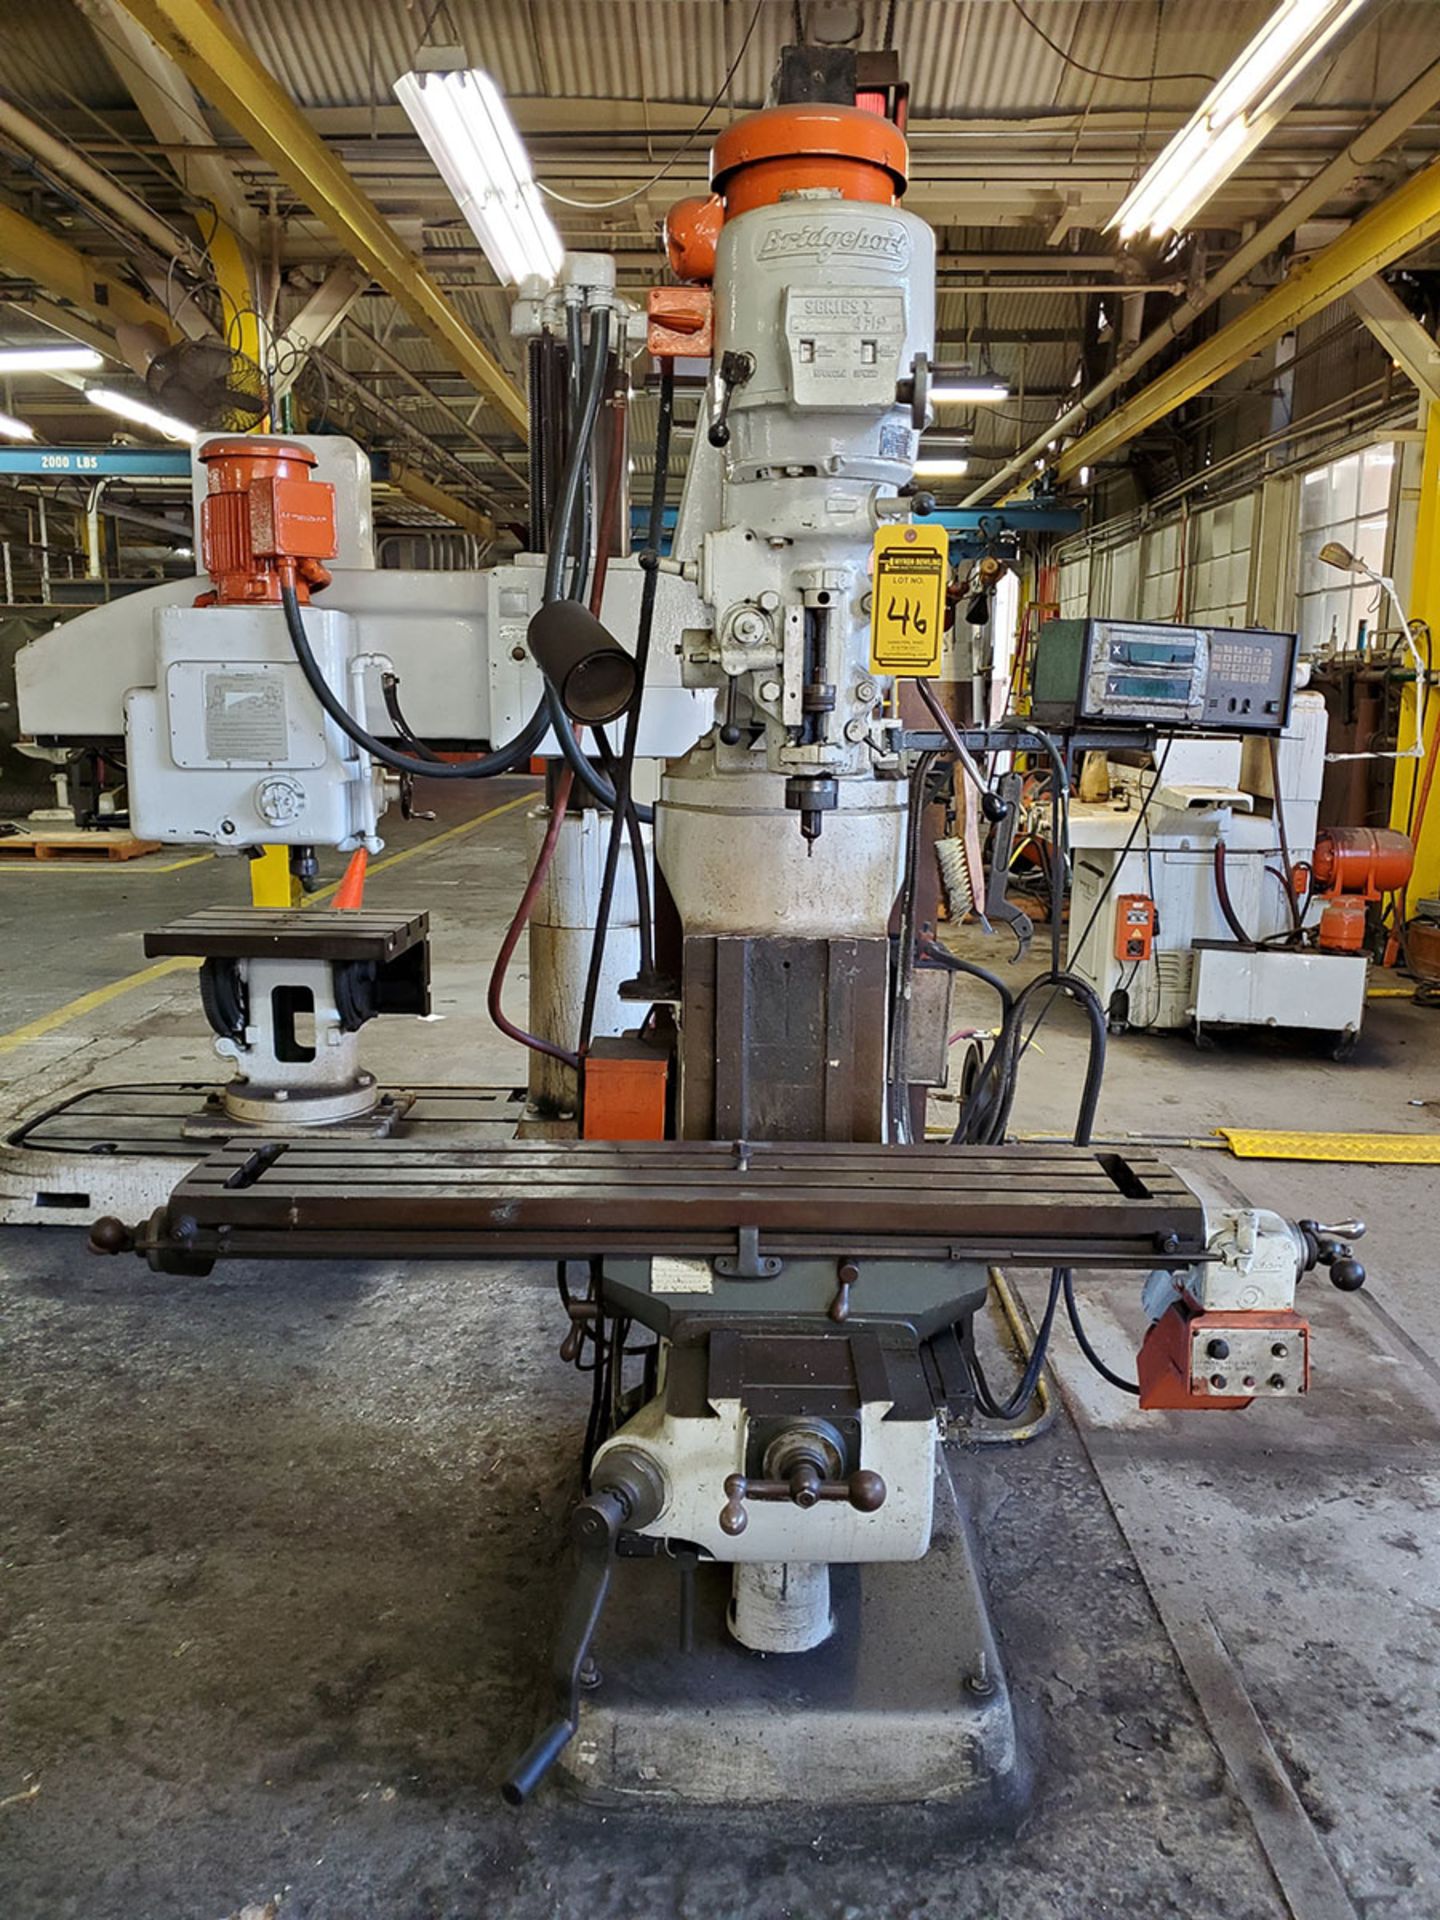 BRIDGEPORT VERTICAL MILLING, SERIES 1, 2 HP, VARIABLE SPEED, 2-AXIS DRO CONTROL, POWER TABLE,